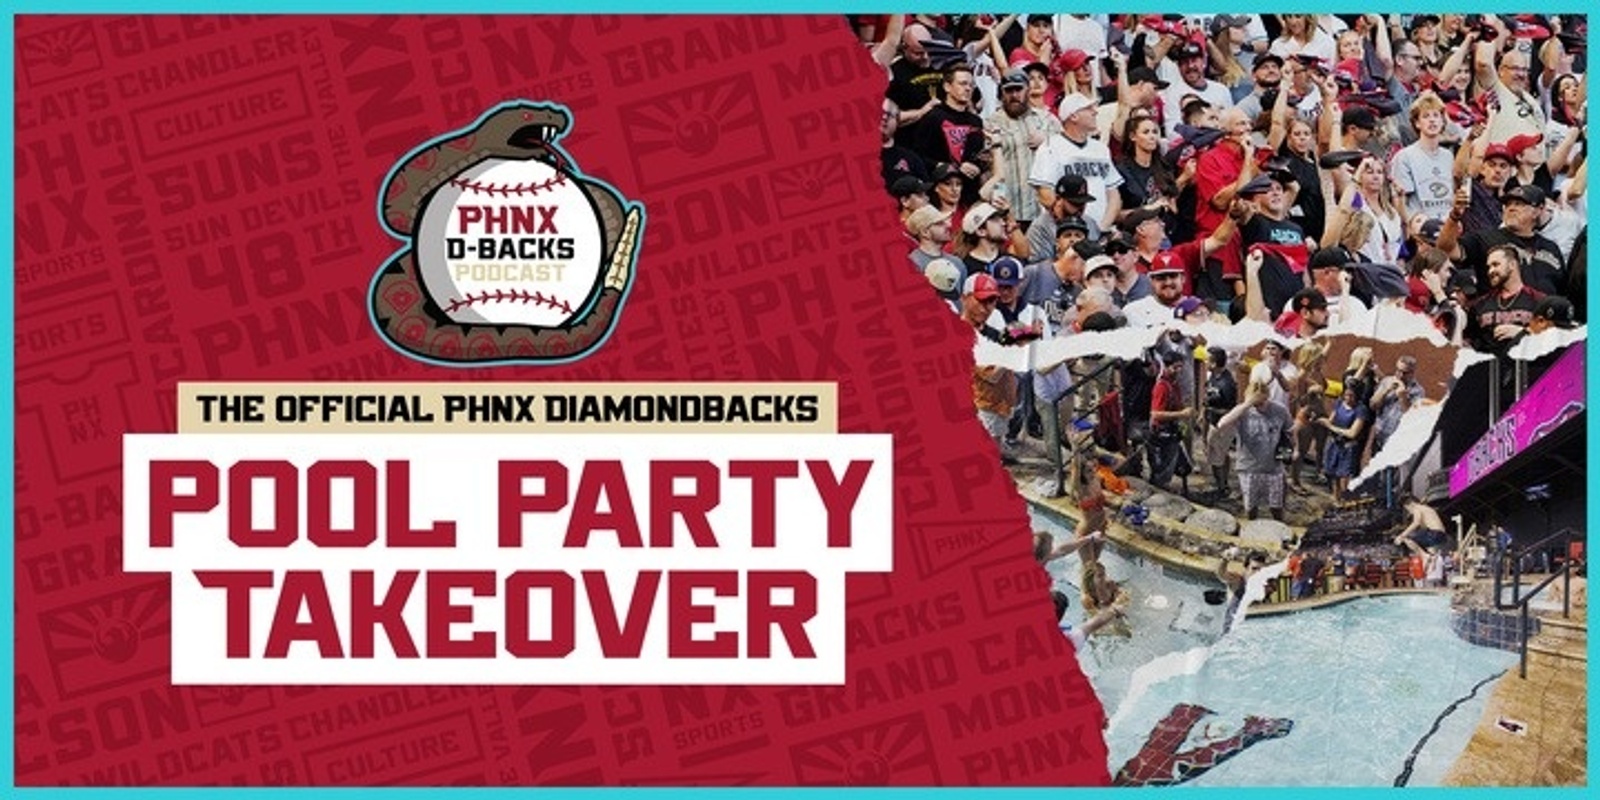 Banner image for PHNX Diamondbacks Pool Party Takeover at Chase Field